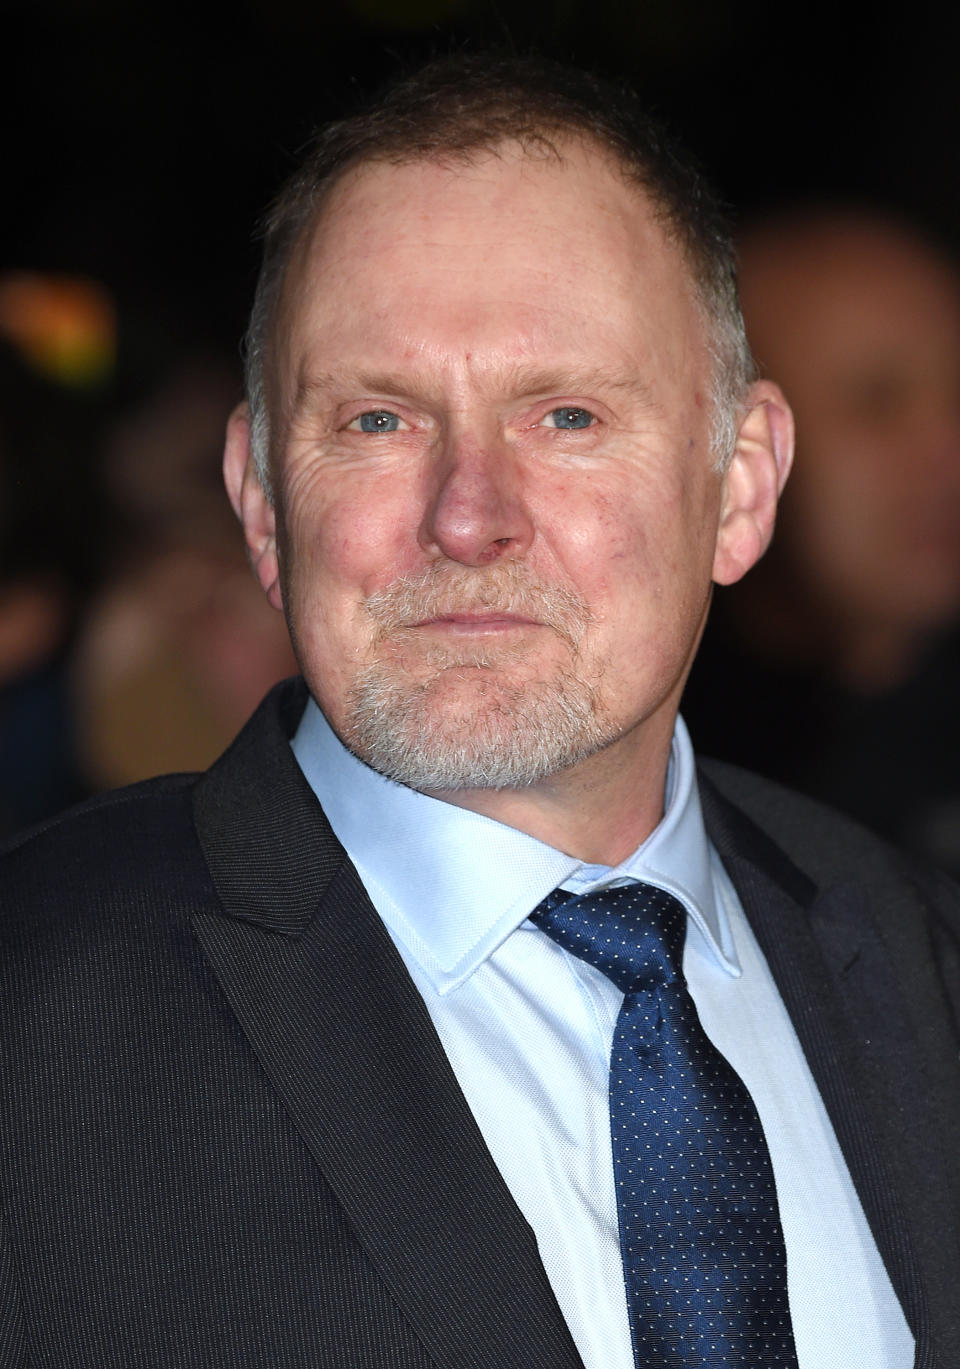 Robert Glenister will star in one of the 15 minute episodes alongside his son Tom. (Photo by Anthony Harvey/Getty Images)